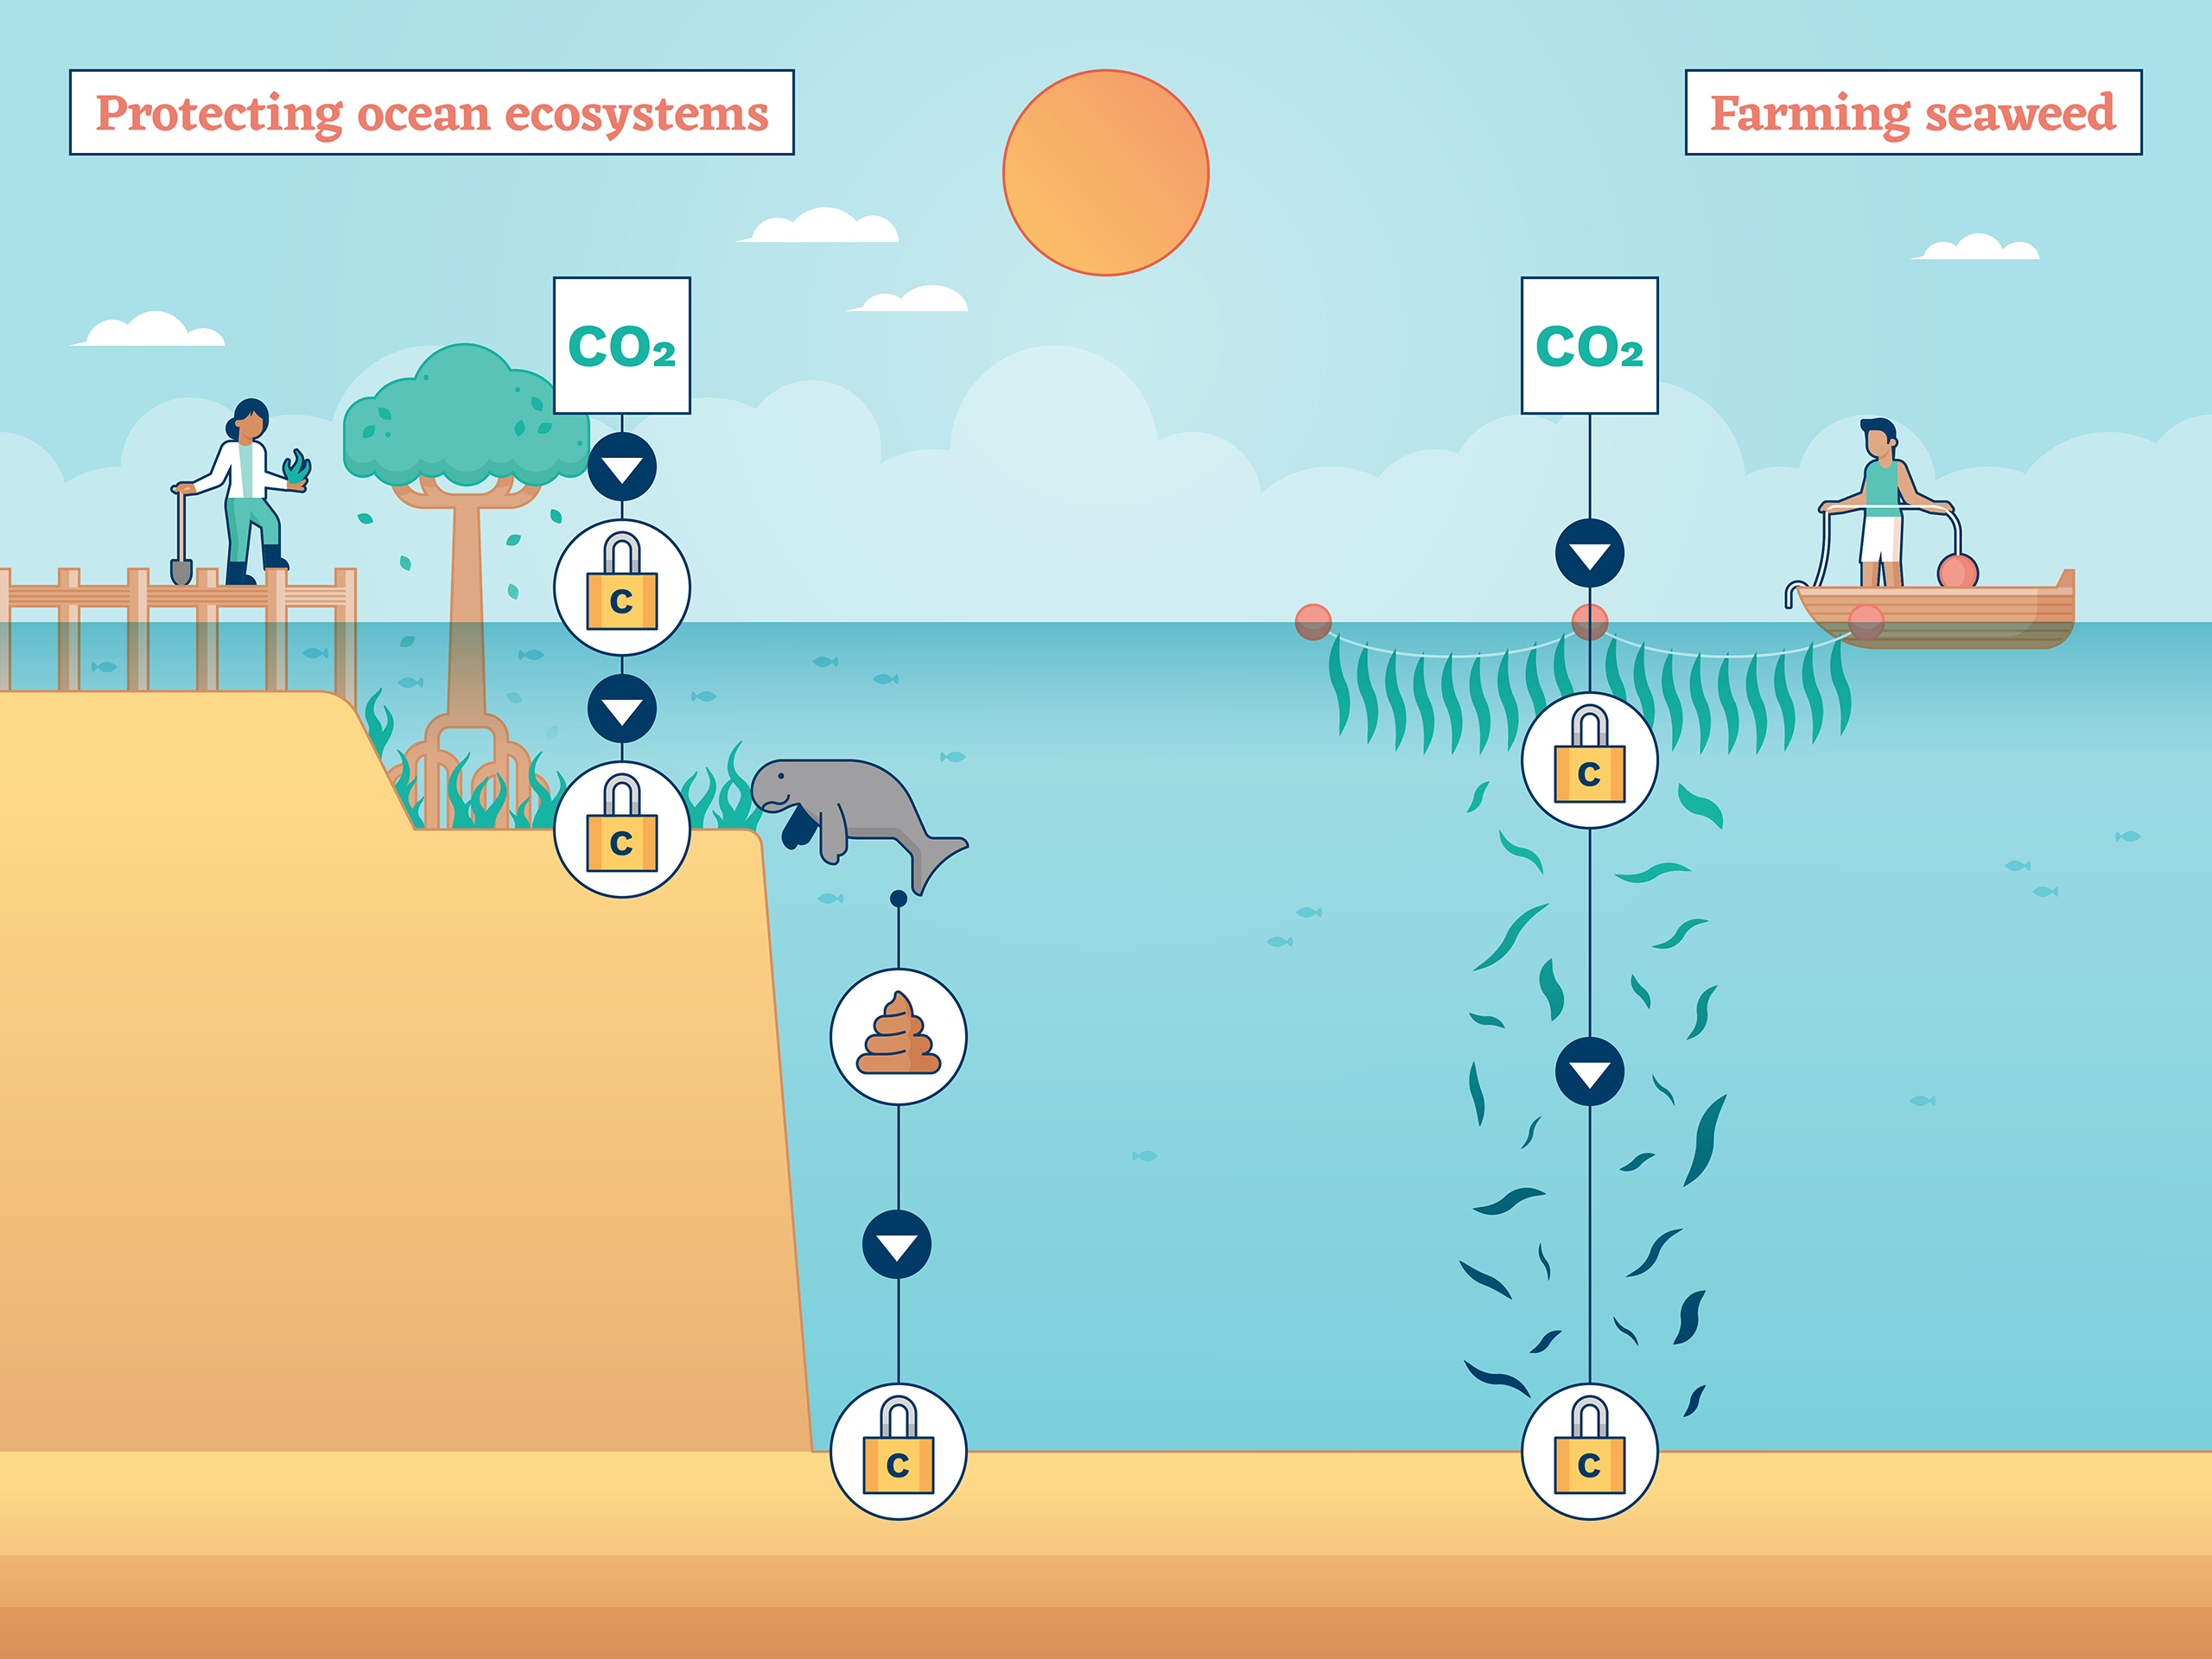 Diagram showing a cross section of the ocean, with a mangrove tree and manatee near the coast and a seaweed farm out at sea